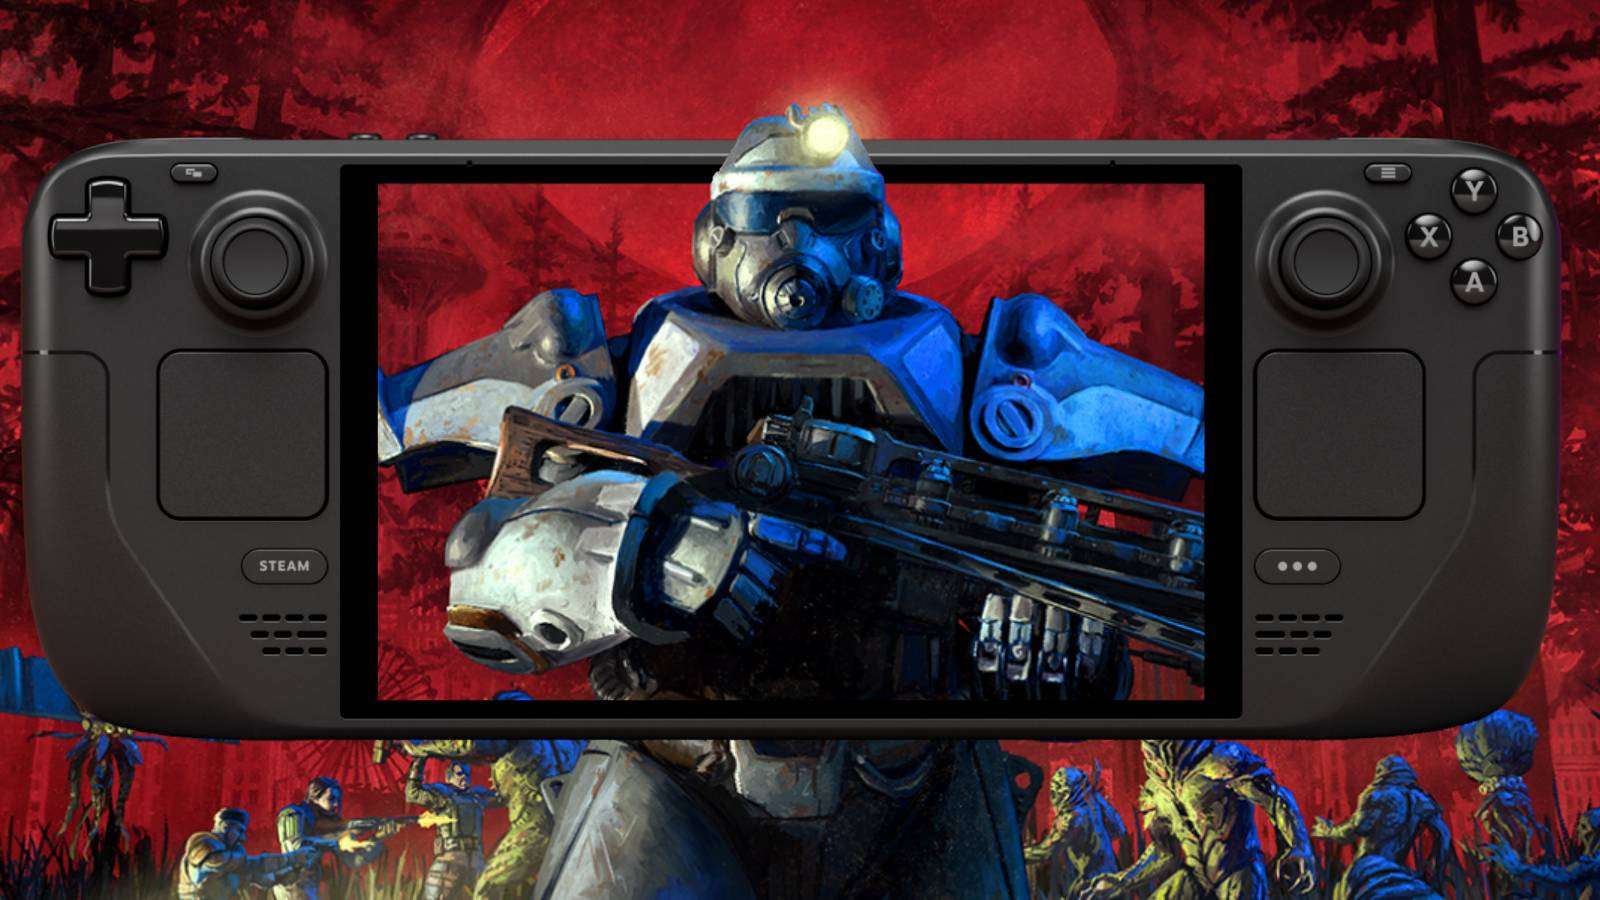 Key-art from Fallout 76 on the screen of a Steam Deck.